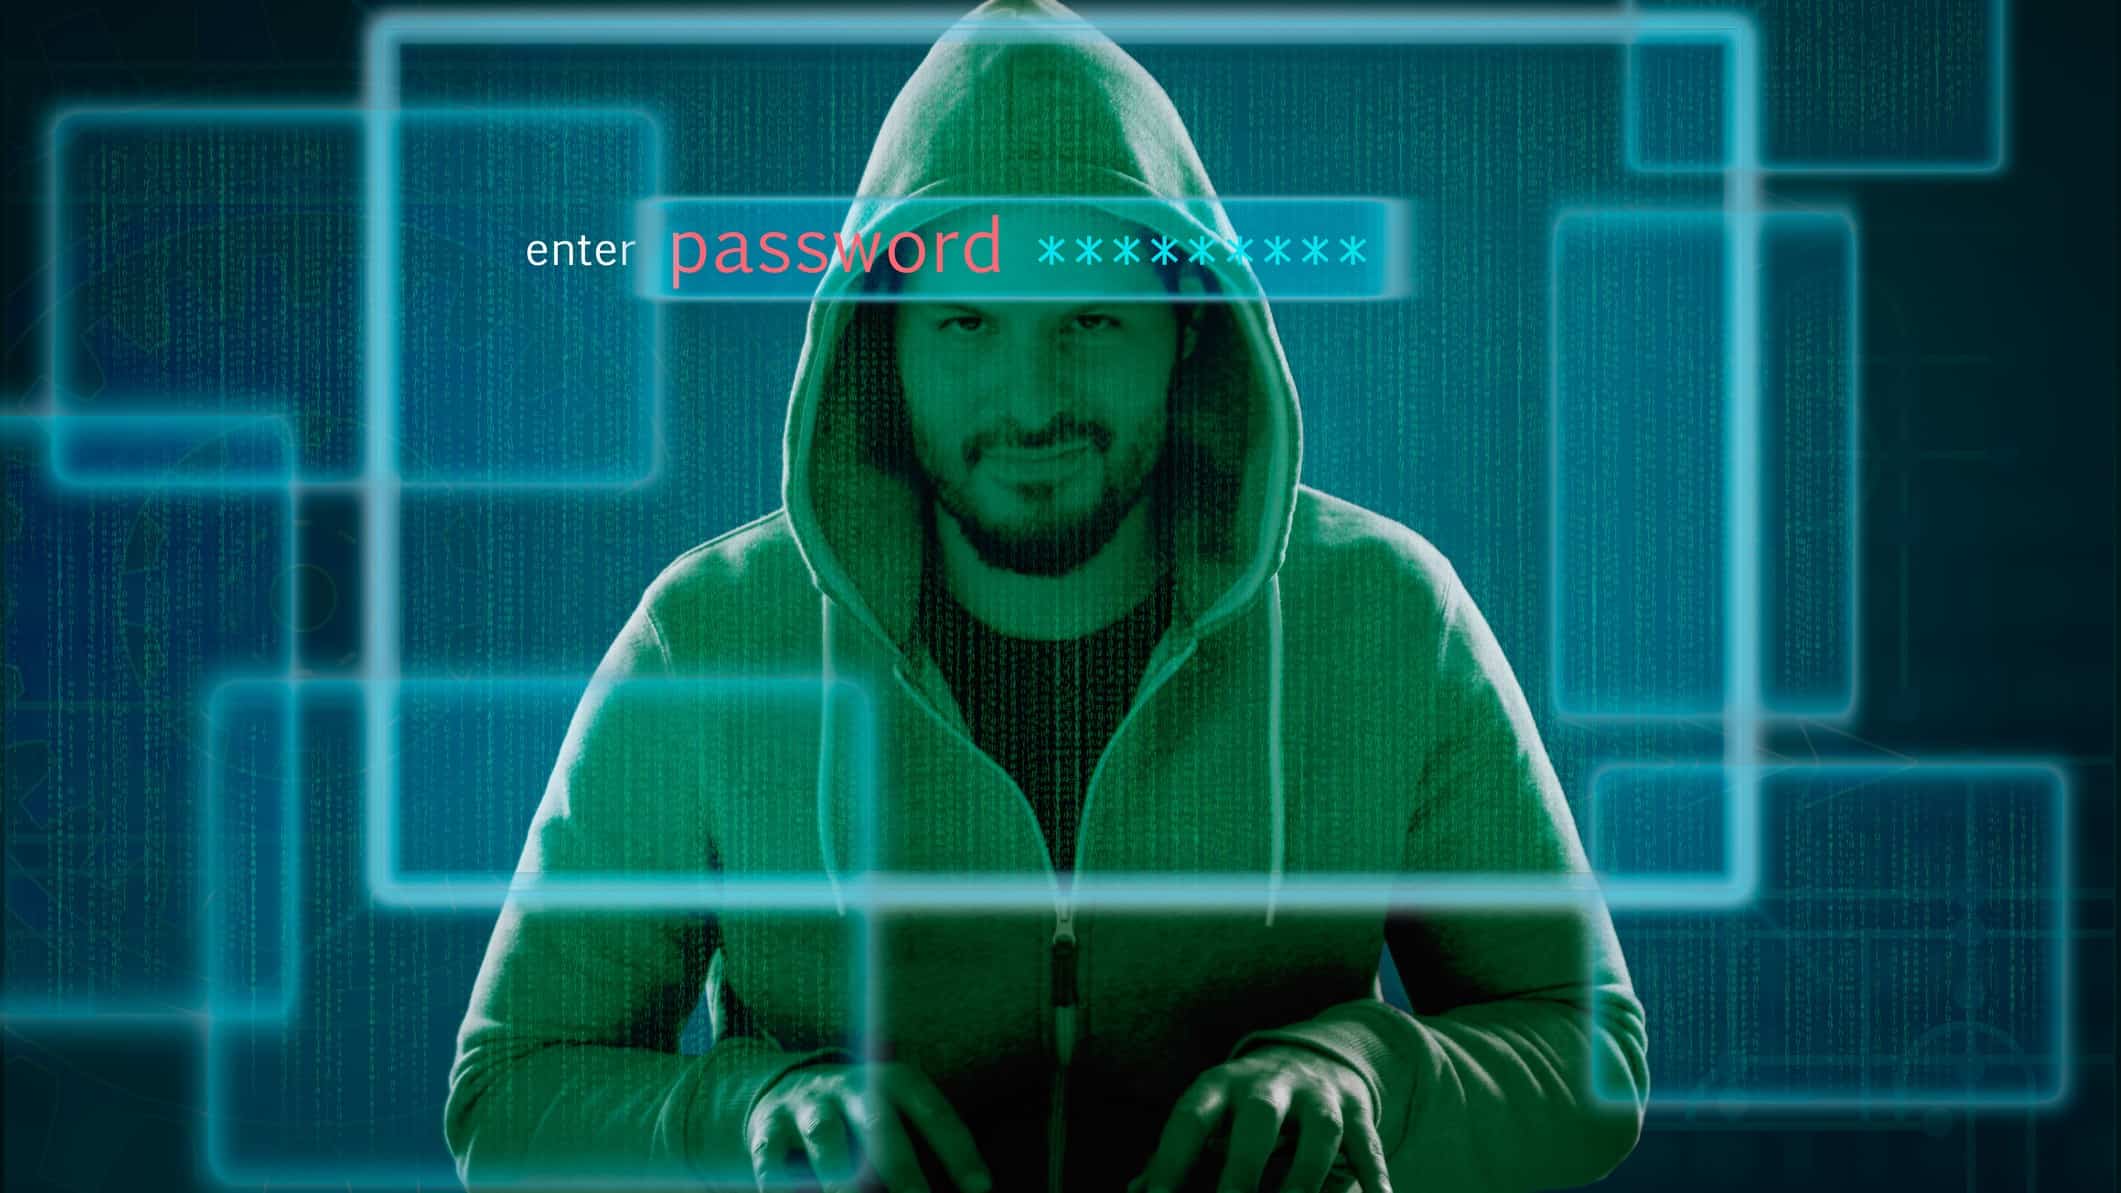 a man in a hoodie grins slyly as he sits with his hands poised on a keyboard. He is superimposed with a graphic image of a computer screen asking for a password, suggesting he is a hacker.